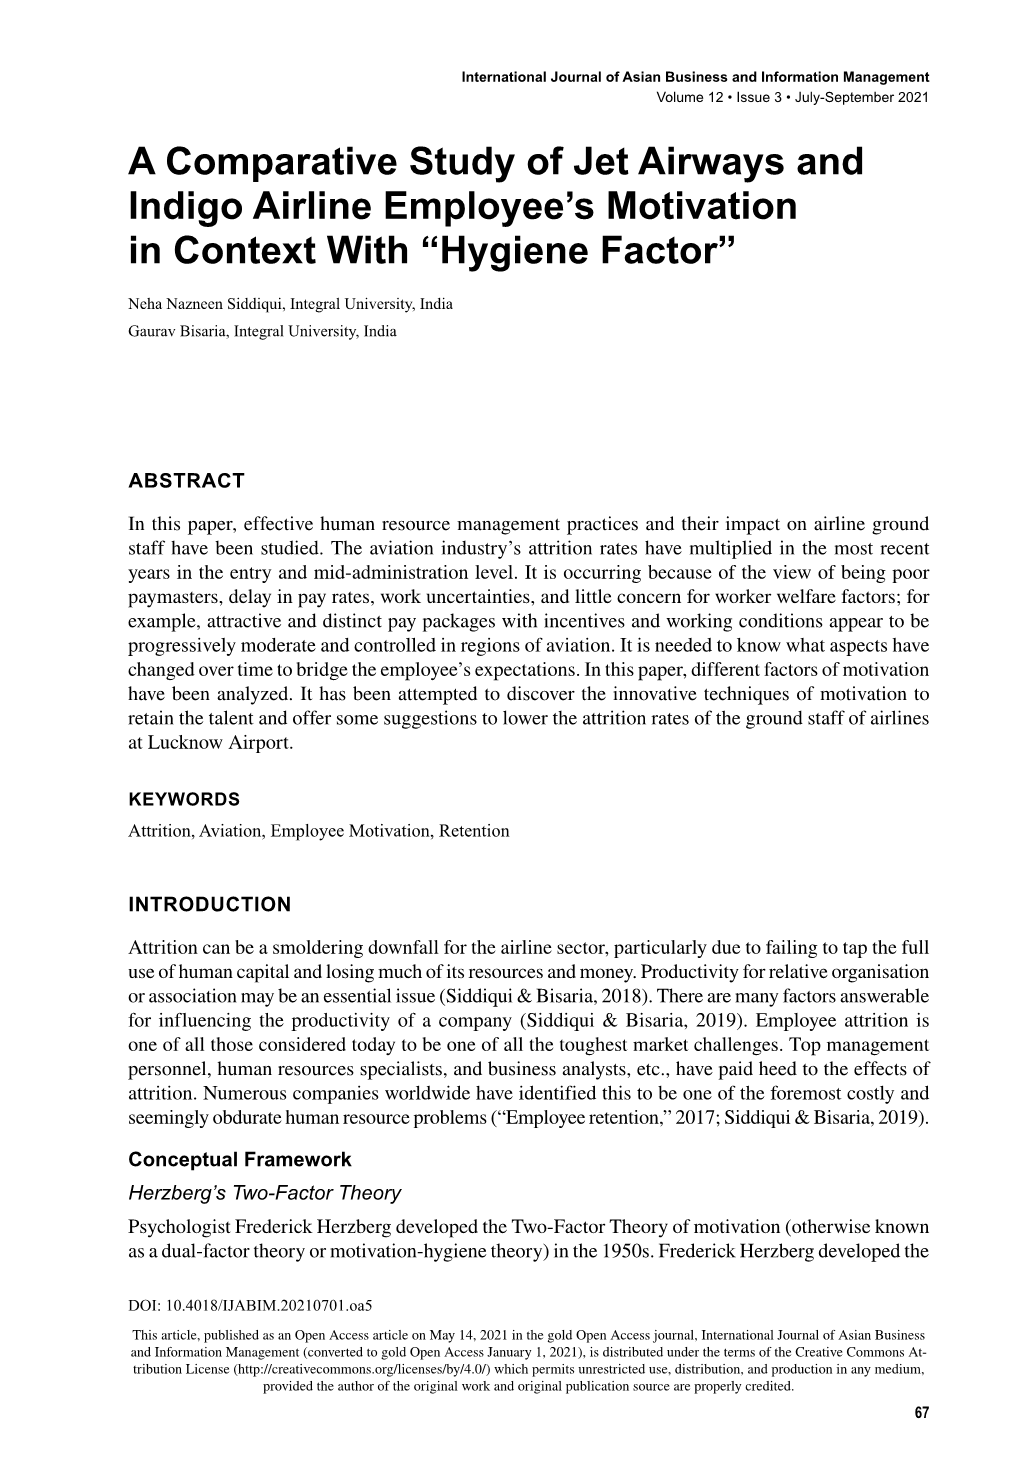 A Comparative Study of Jet Airways and Indigo Airline Employee’S Motivation in Context with “Hygiene Factor”